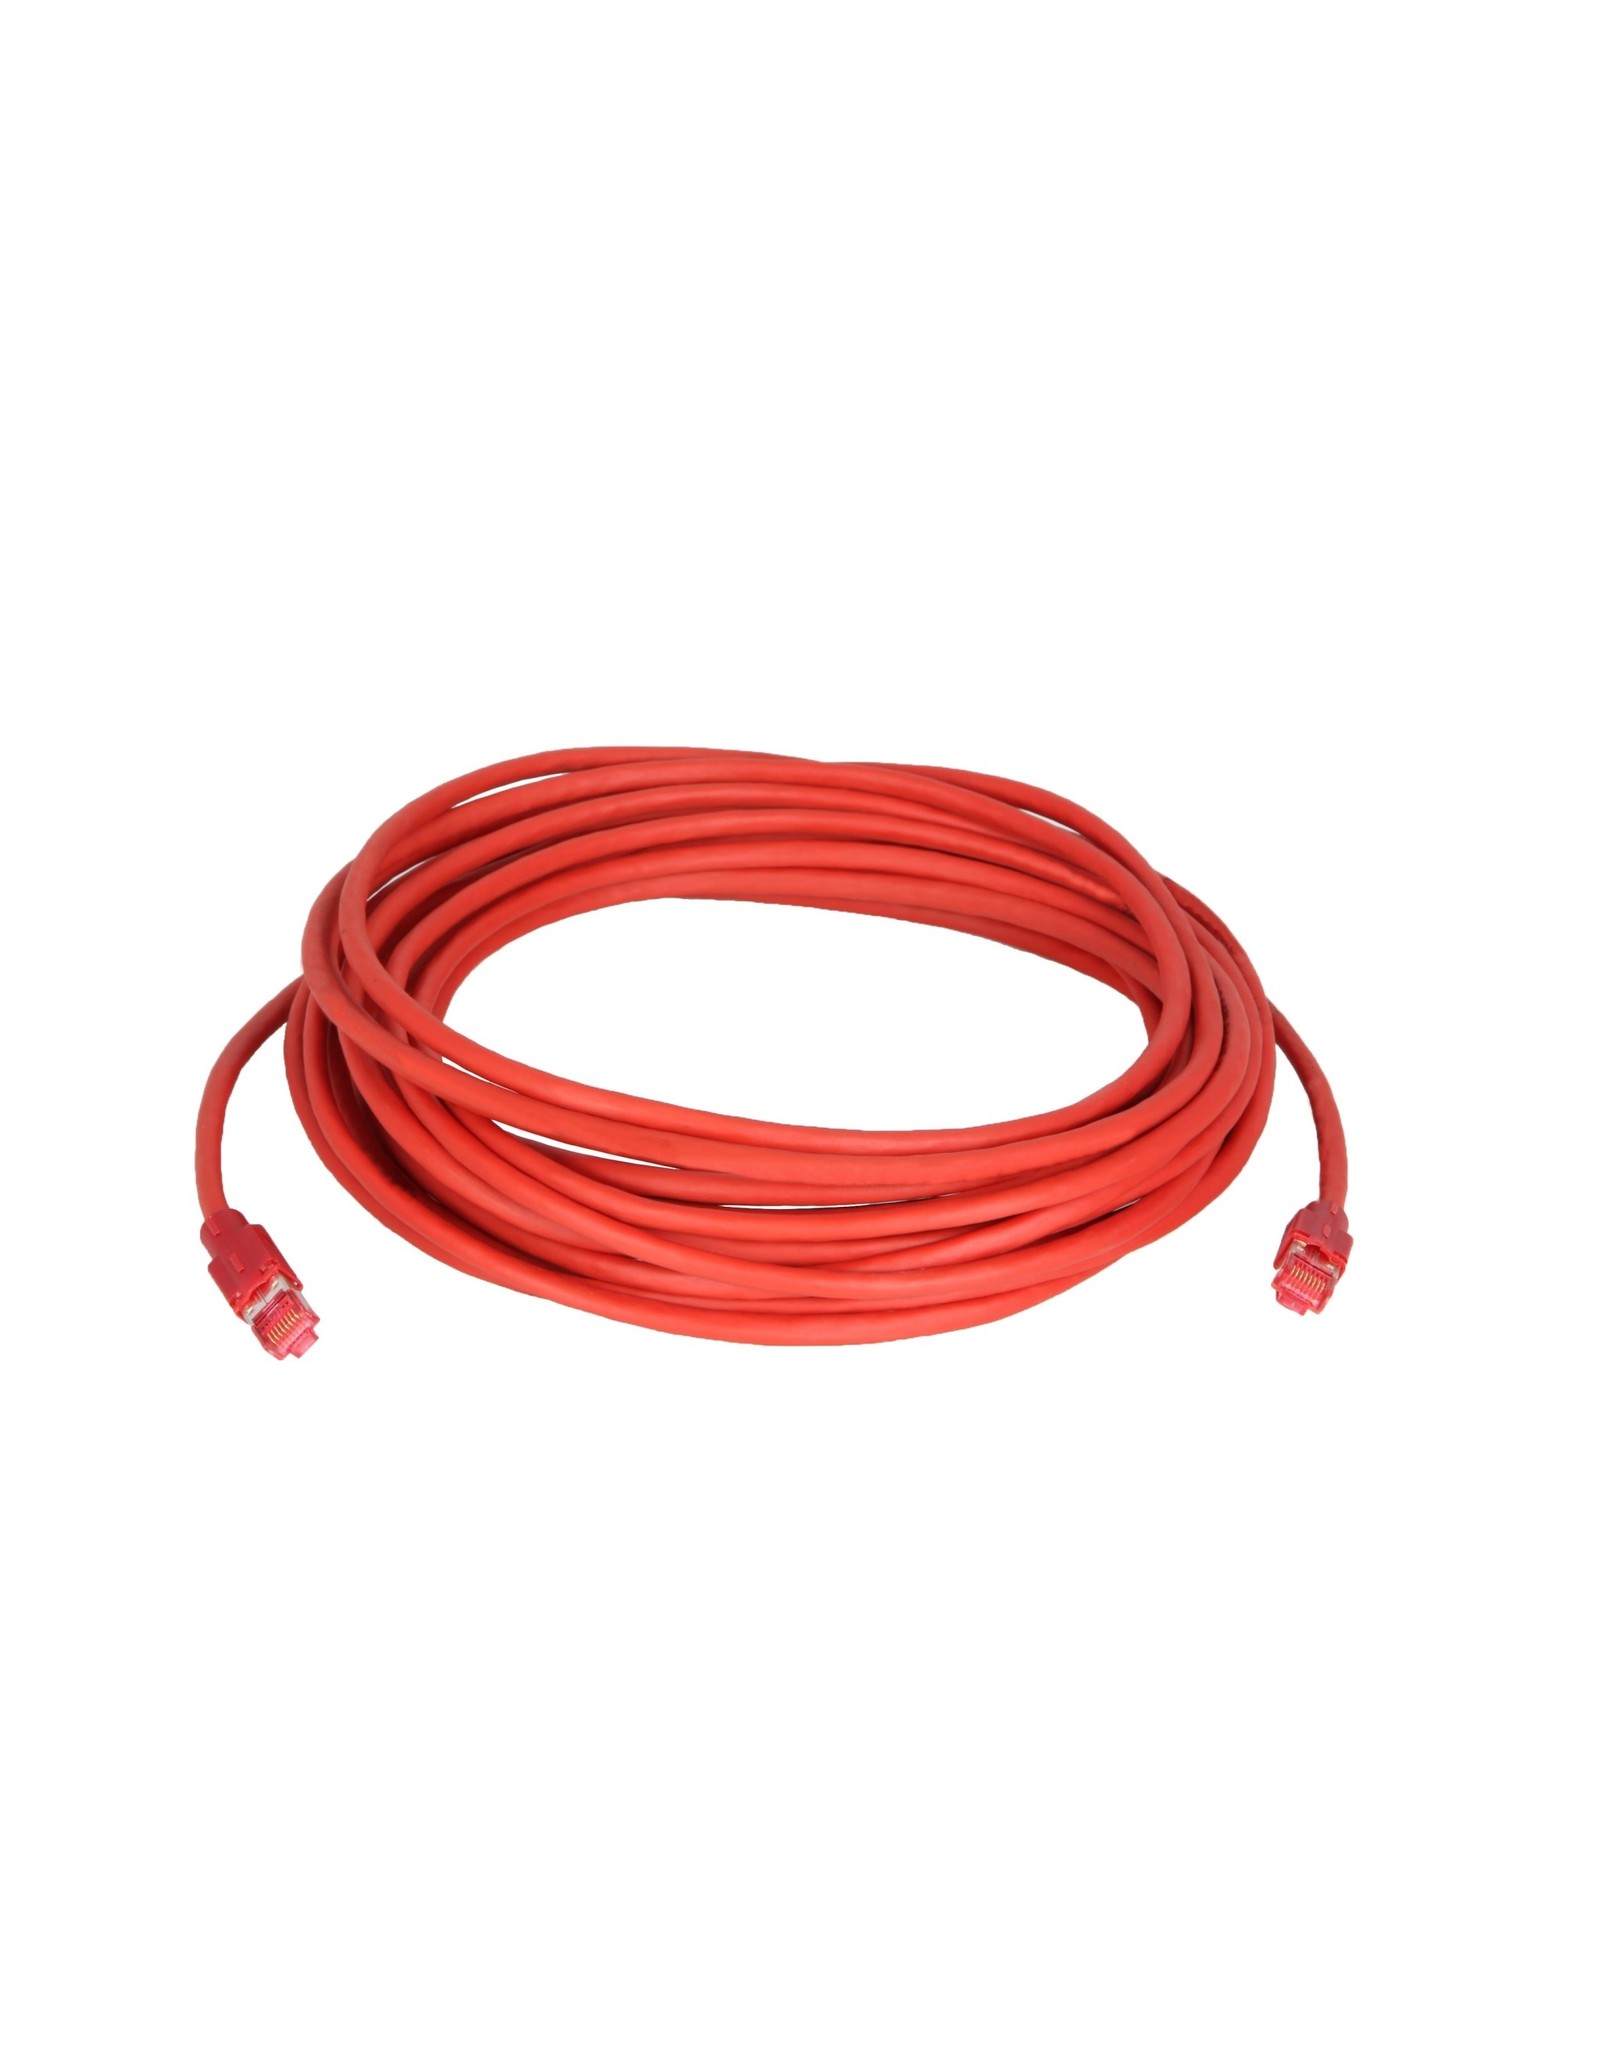 Baader Planetarium Baader Network Cable (red) with ColdTemp-specified CAT-7 wire – (Spedify Length)